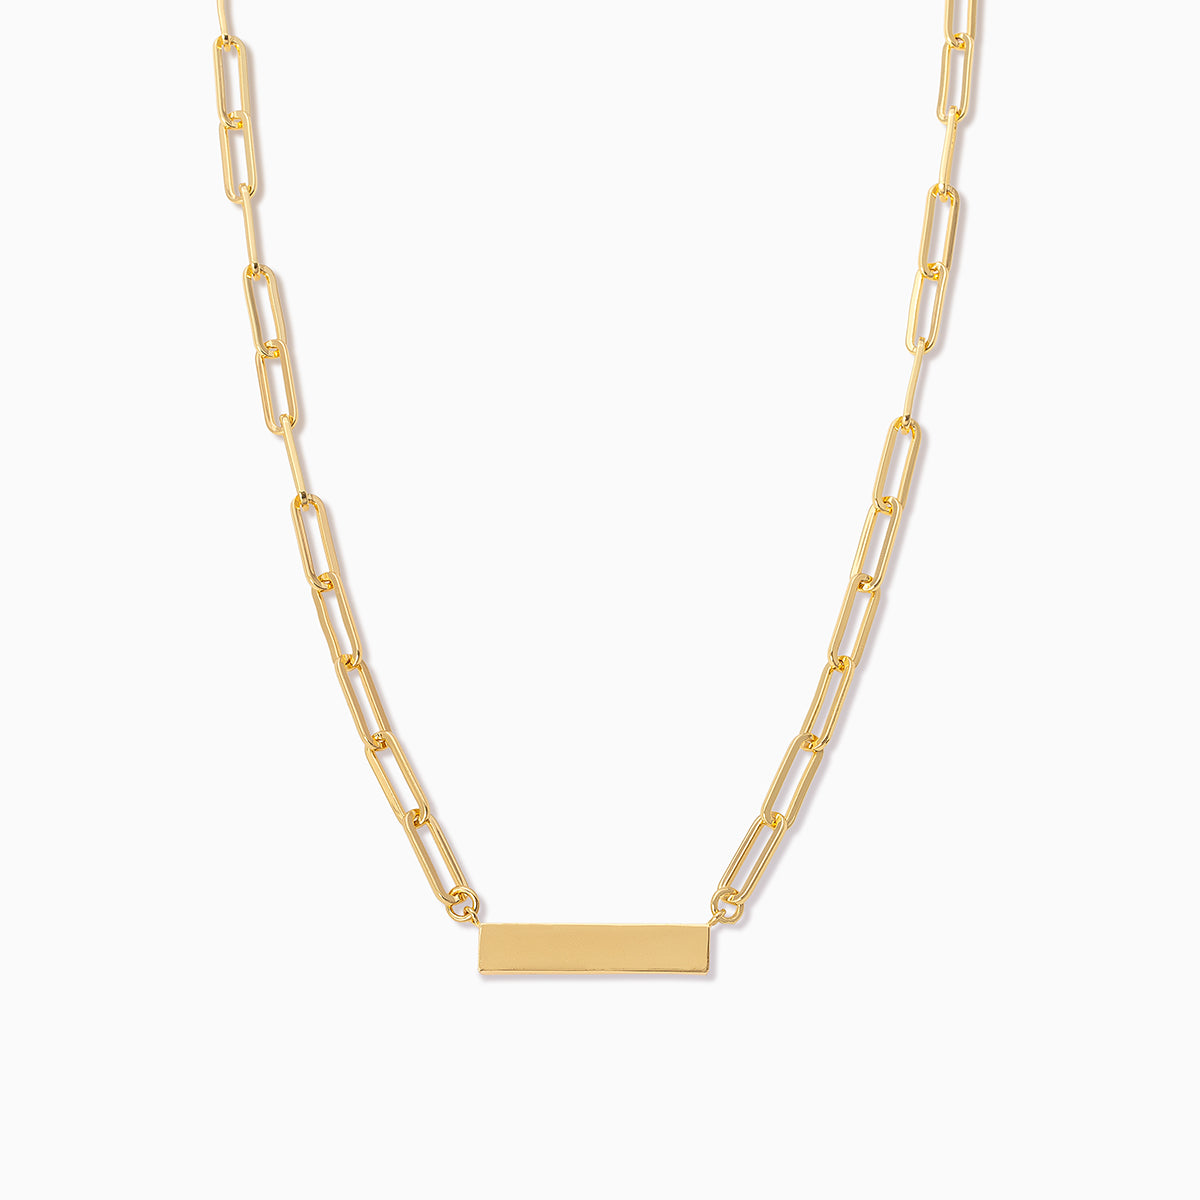 Chain and Bar Necklace | Gold | Product Image | Uncommon James